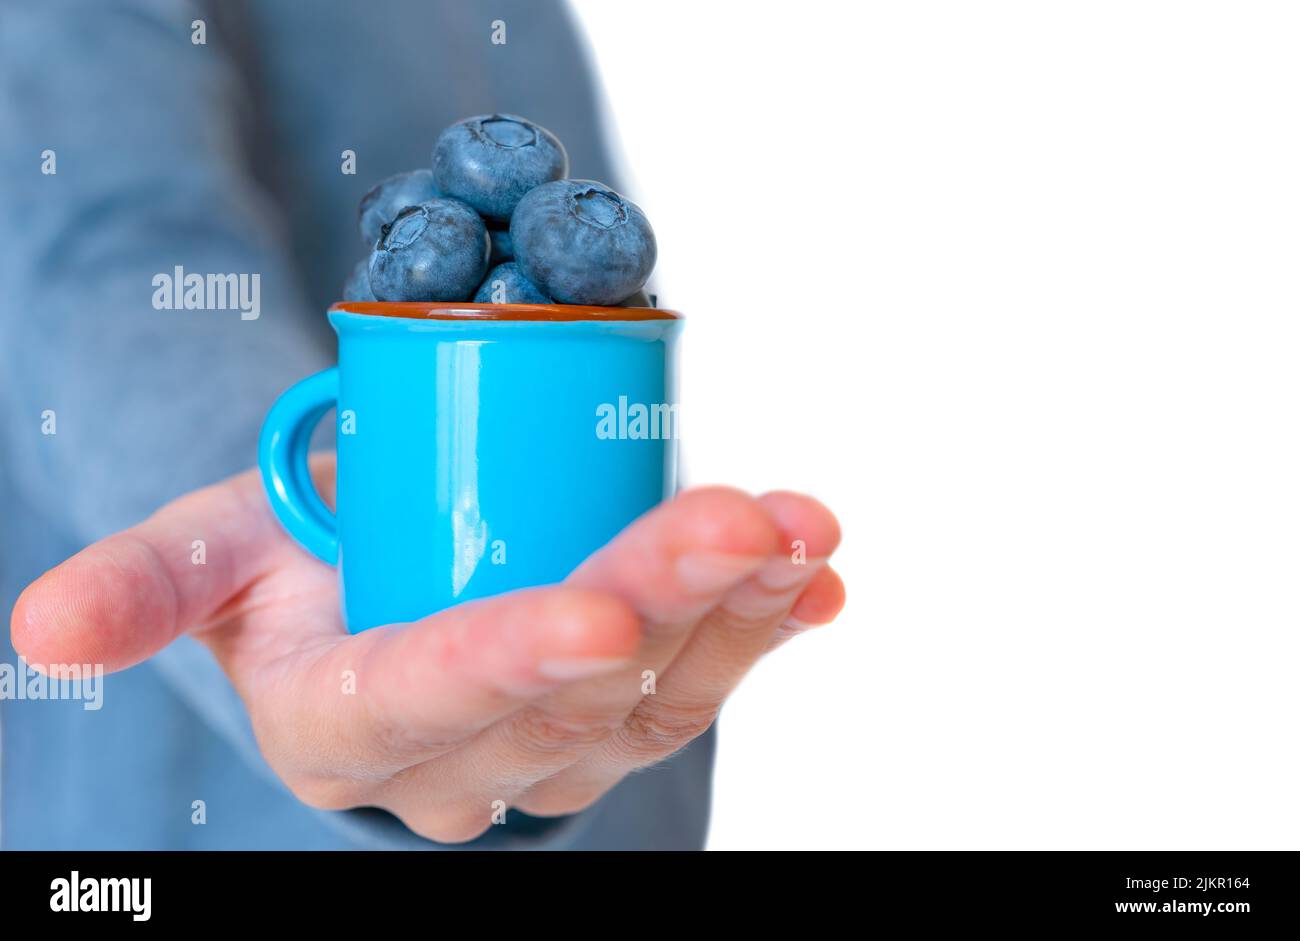 Woman holding a small blue enamel mug with fresh blueberries isolated on white background with copy space. Healthy eating concept. Stock Photo